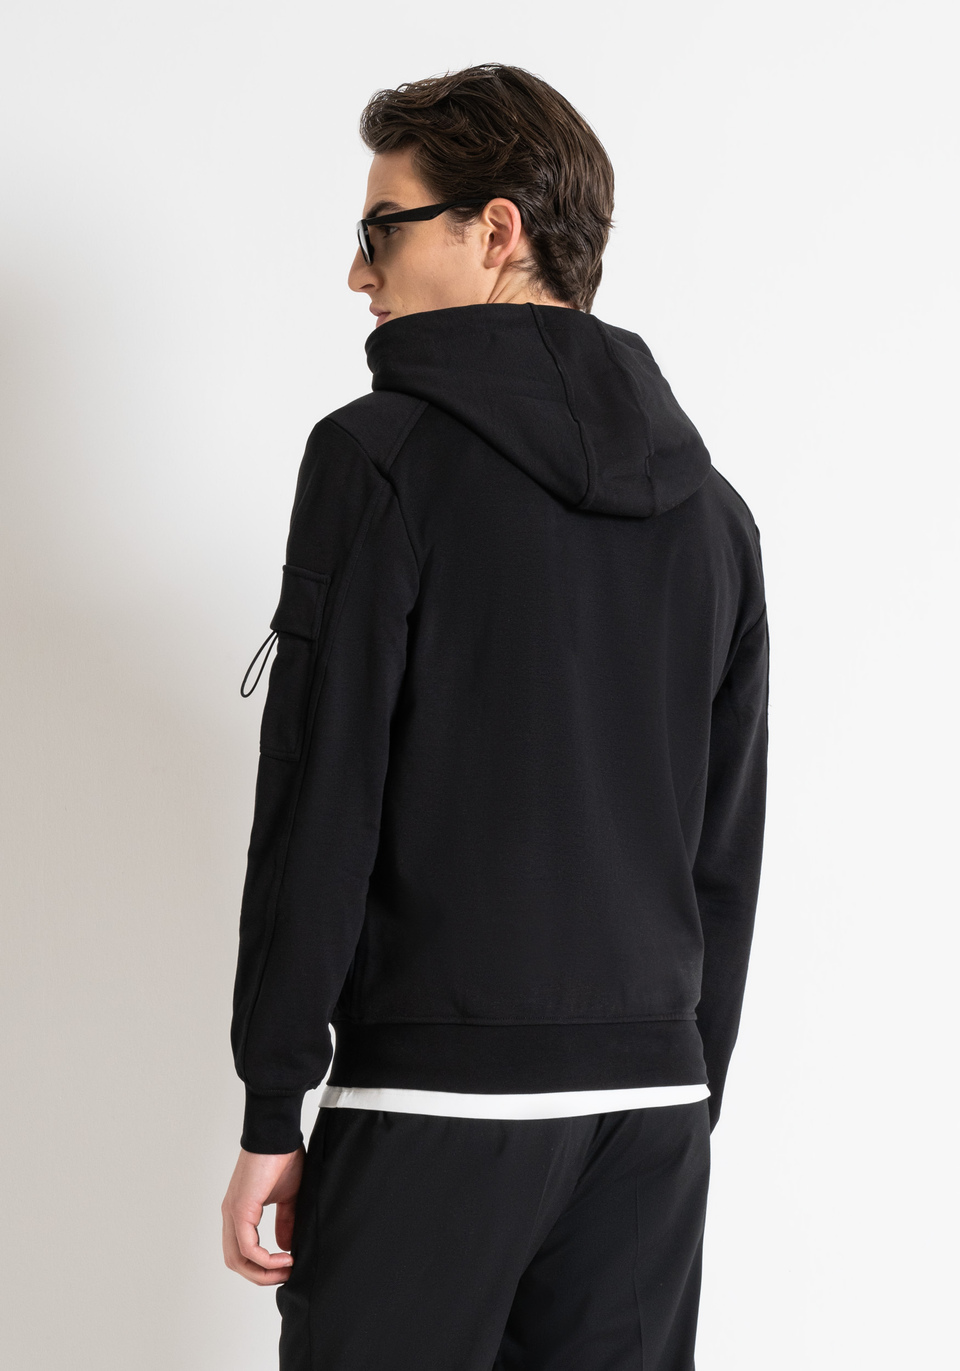 REGULAR FIT SWEATSHIRT IN SUSTAINABLE COTTON-POLYESTER STRETCH FABRIC WITH LOGO PATCH - Antony Morato Online Shop